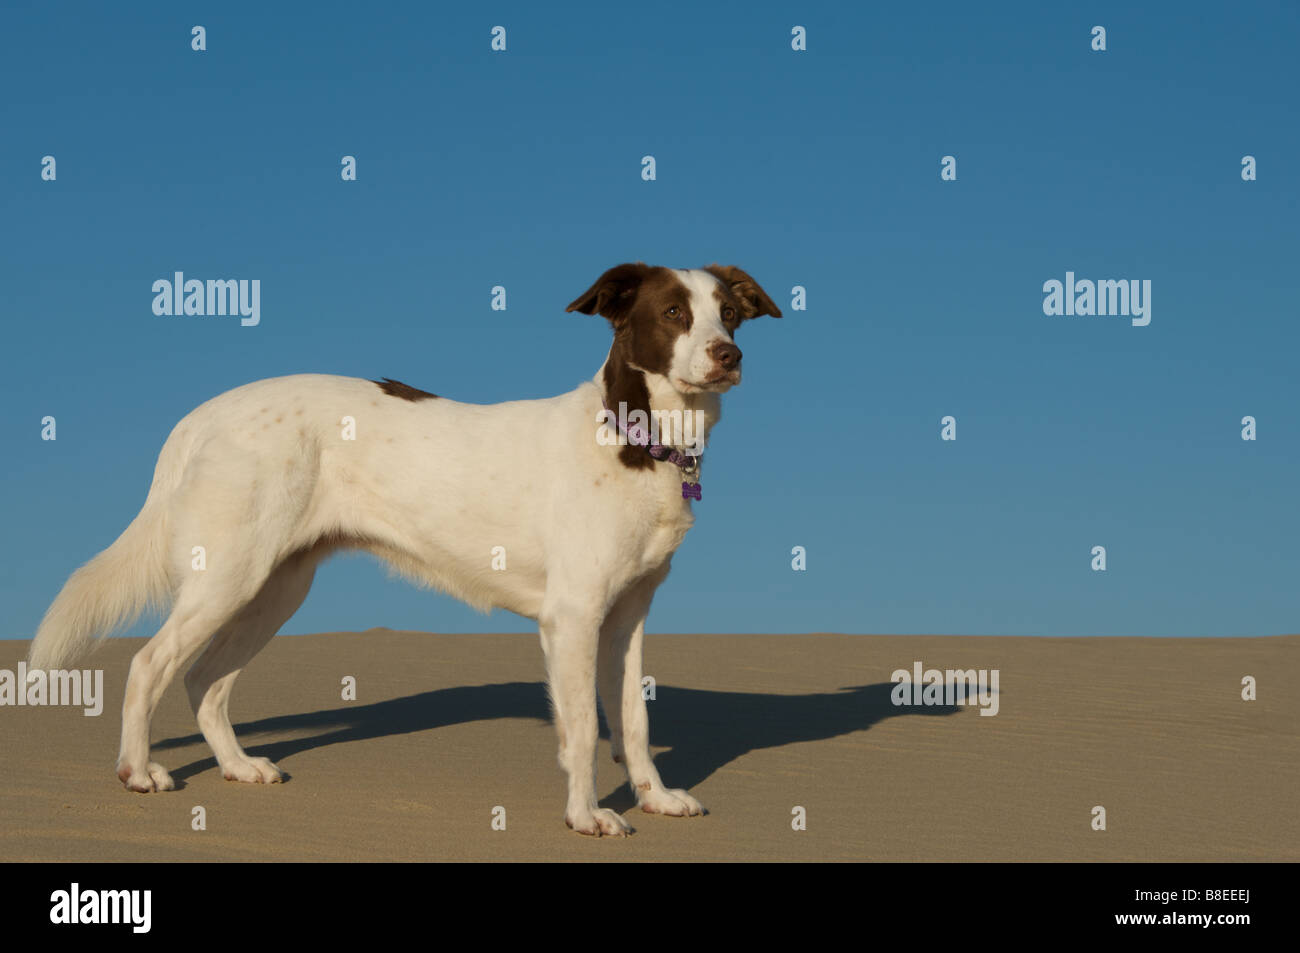 White dog (Brittany Spaniel mix) standing in Oregon sand dunes. Full body side view, solid blue sky behind. Stock Photo